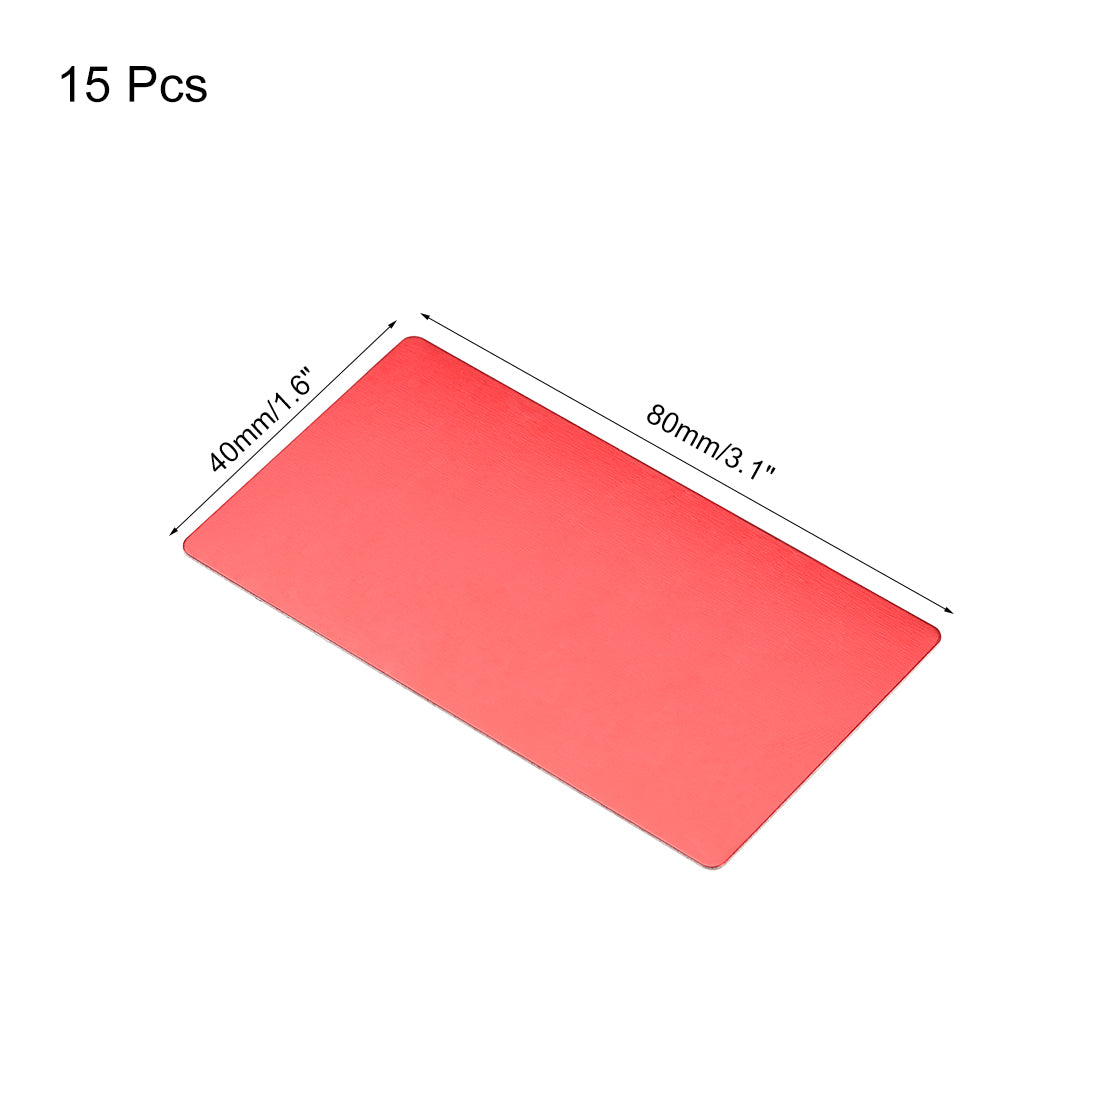 uxcell Uxcell Blank Metal Card, Anodized Aluminum Plates for DIY Laser Printing